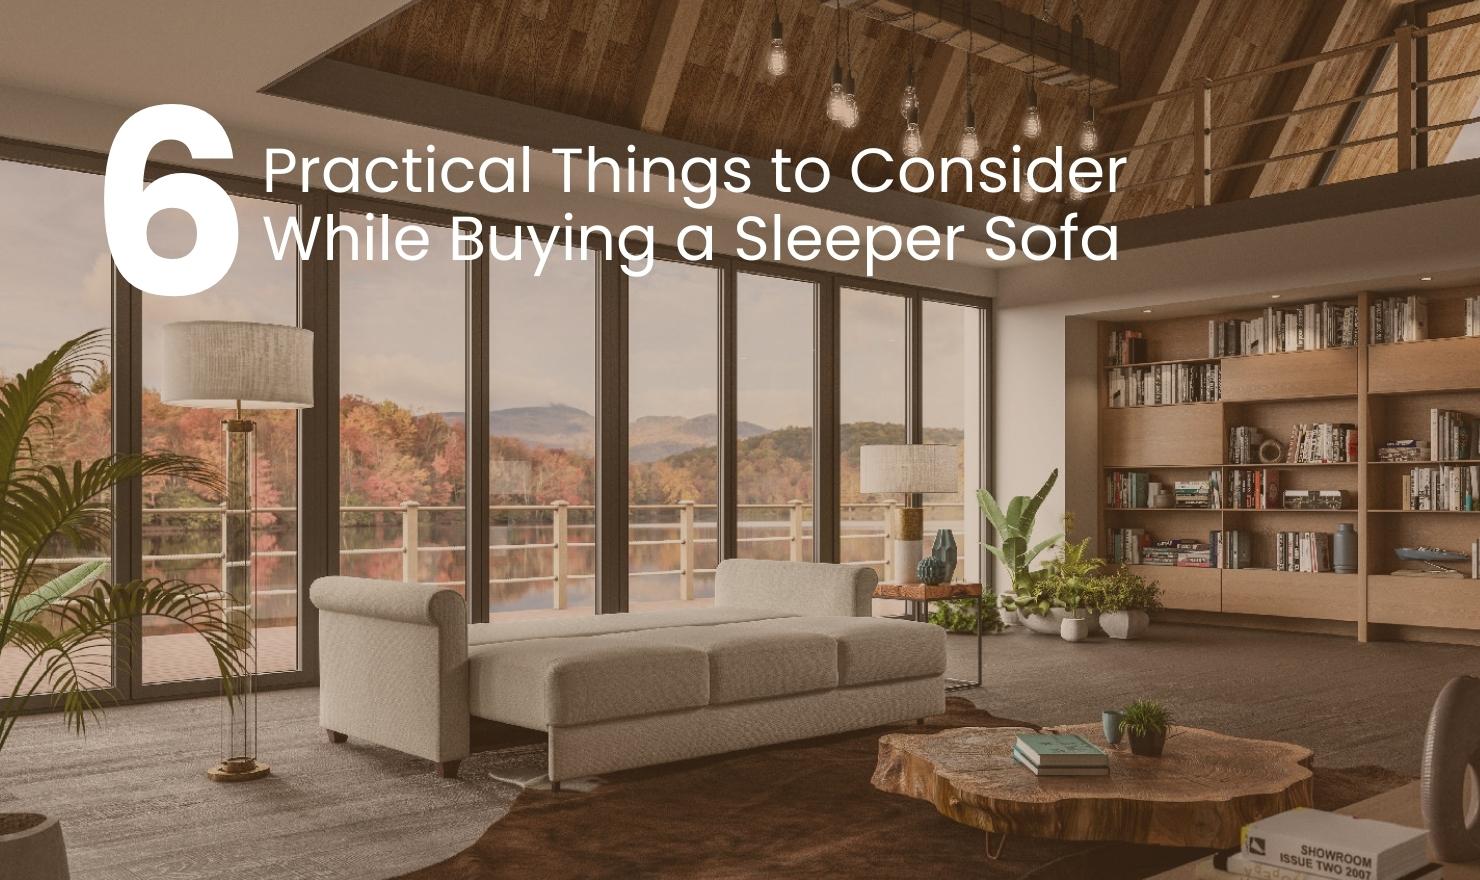 Practical Things to Consider While Buying a Sleeper Sofa